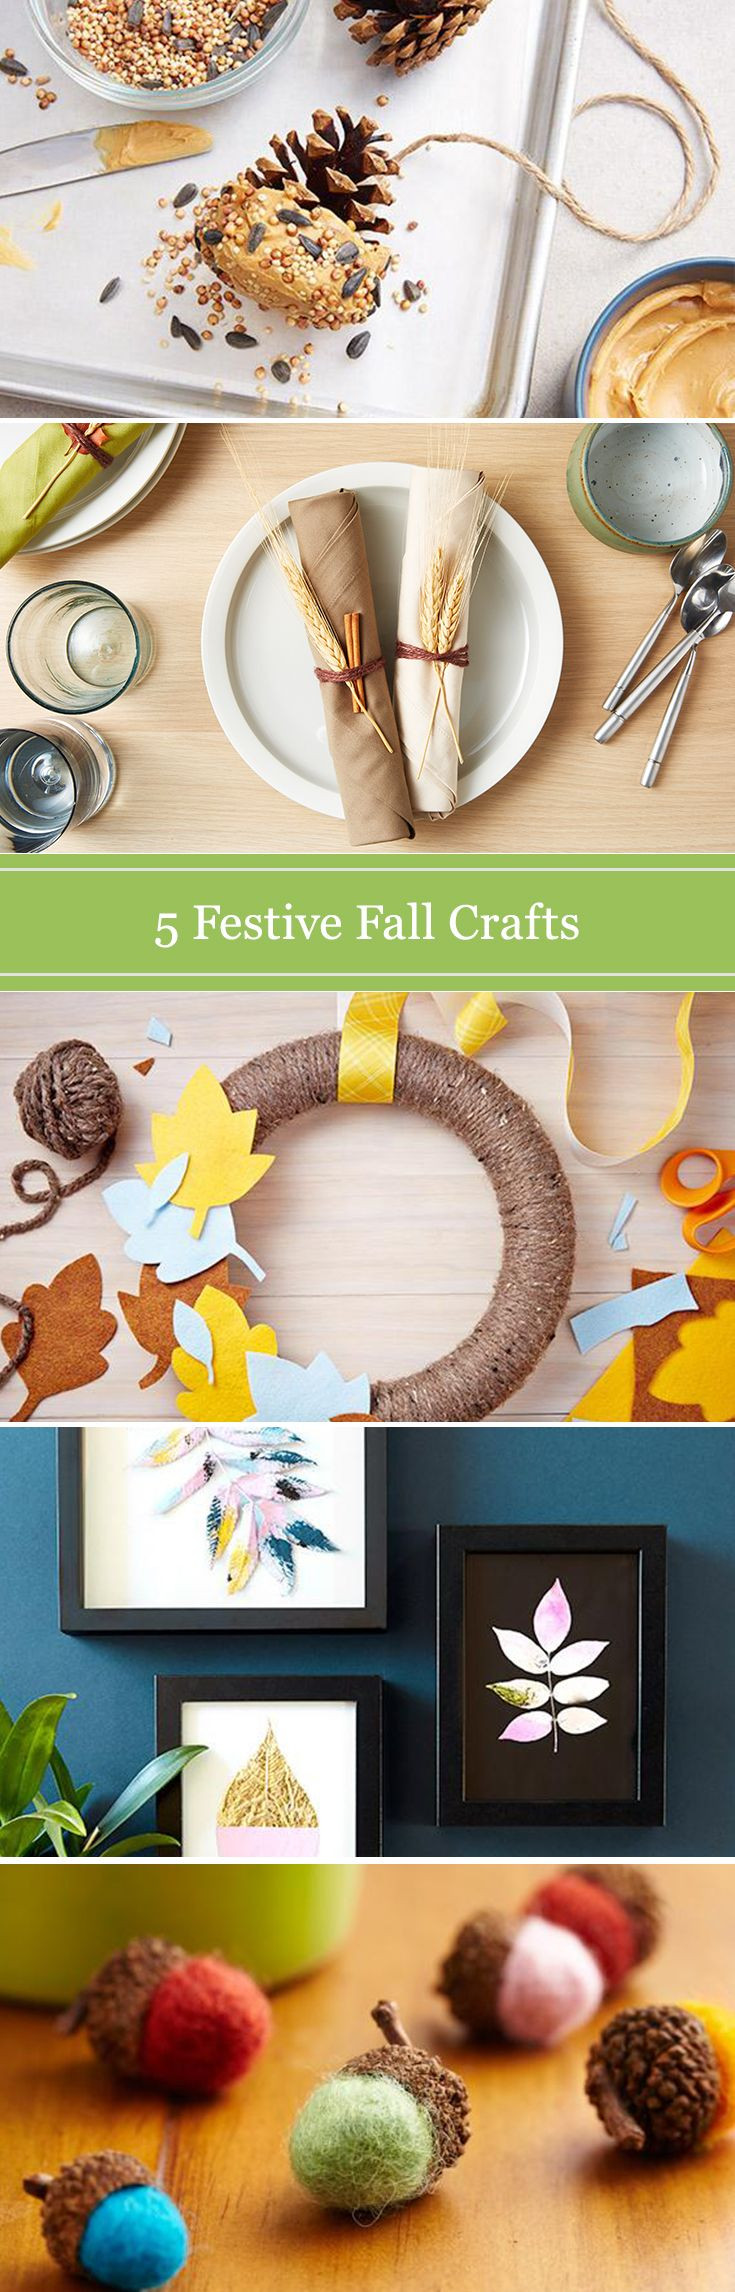 Simple Crafts Ideas For Adults
 51 best Craft Ideas for Adults images on Pinterest